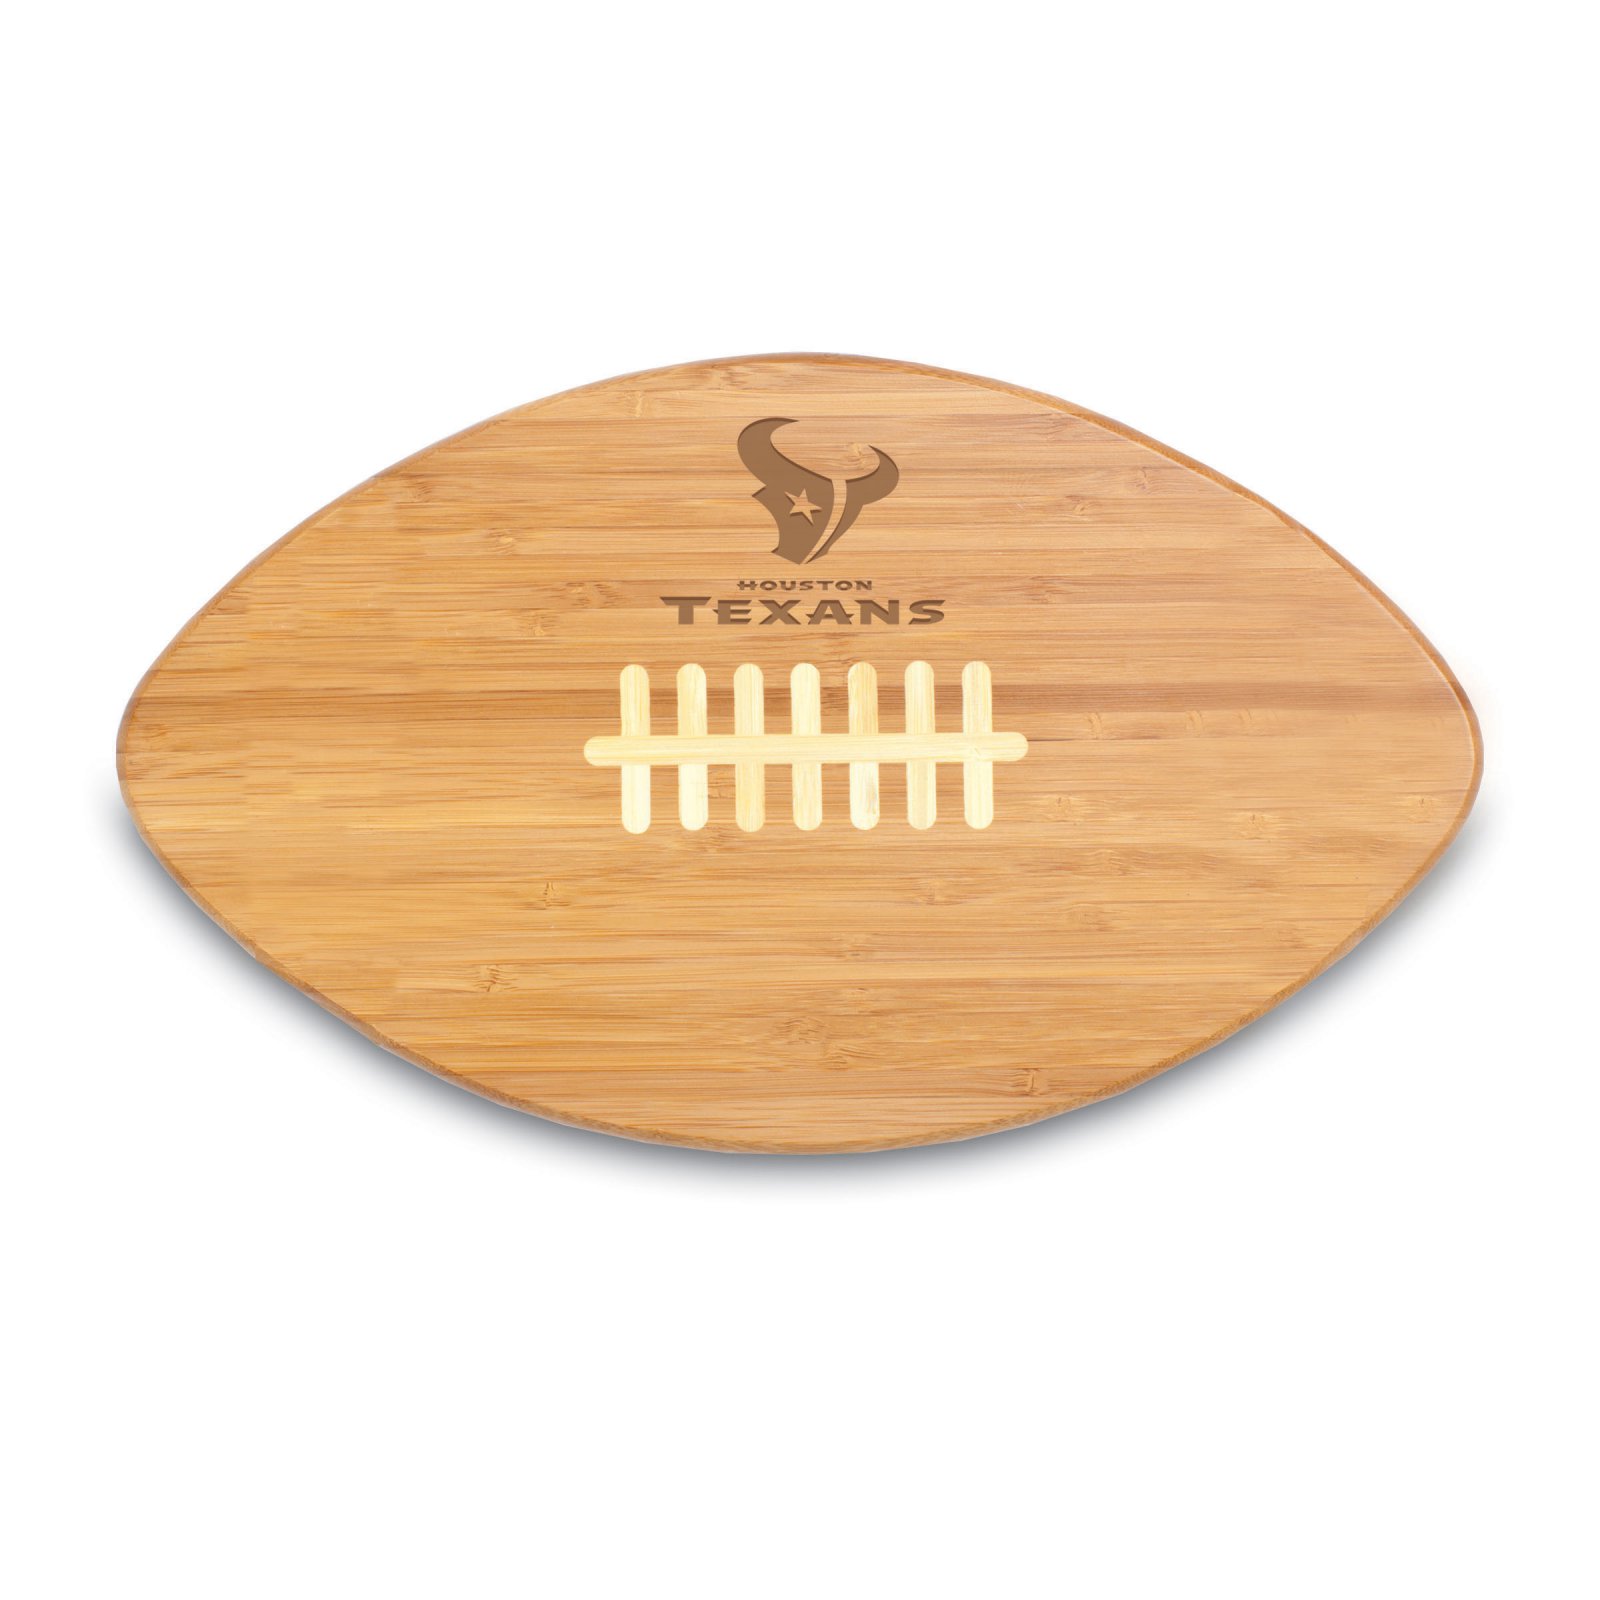 New York Jets Football Cutting Board - image 2 of 5